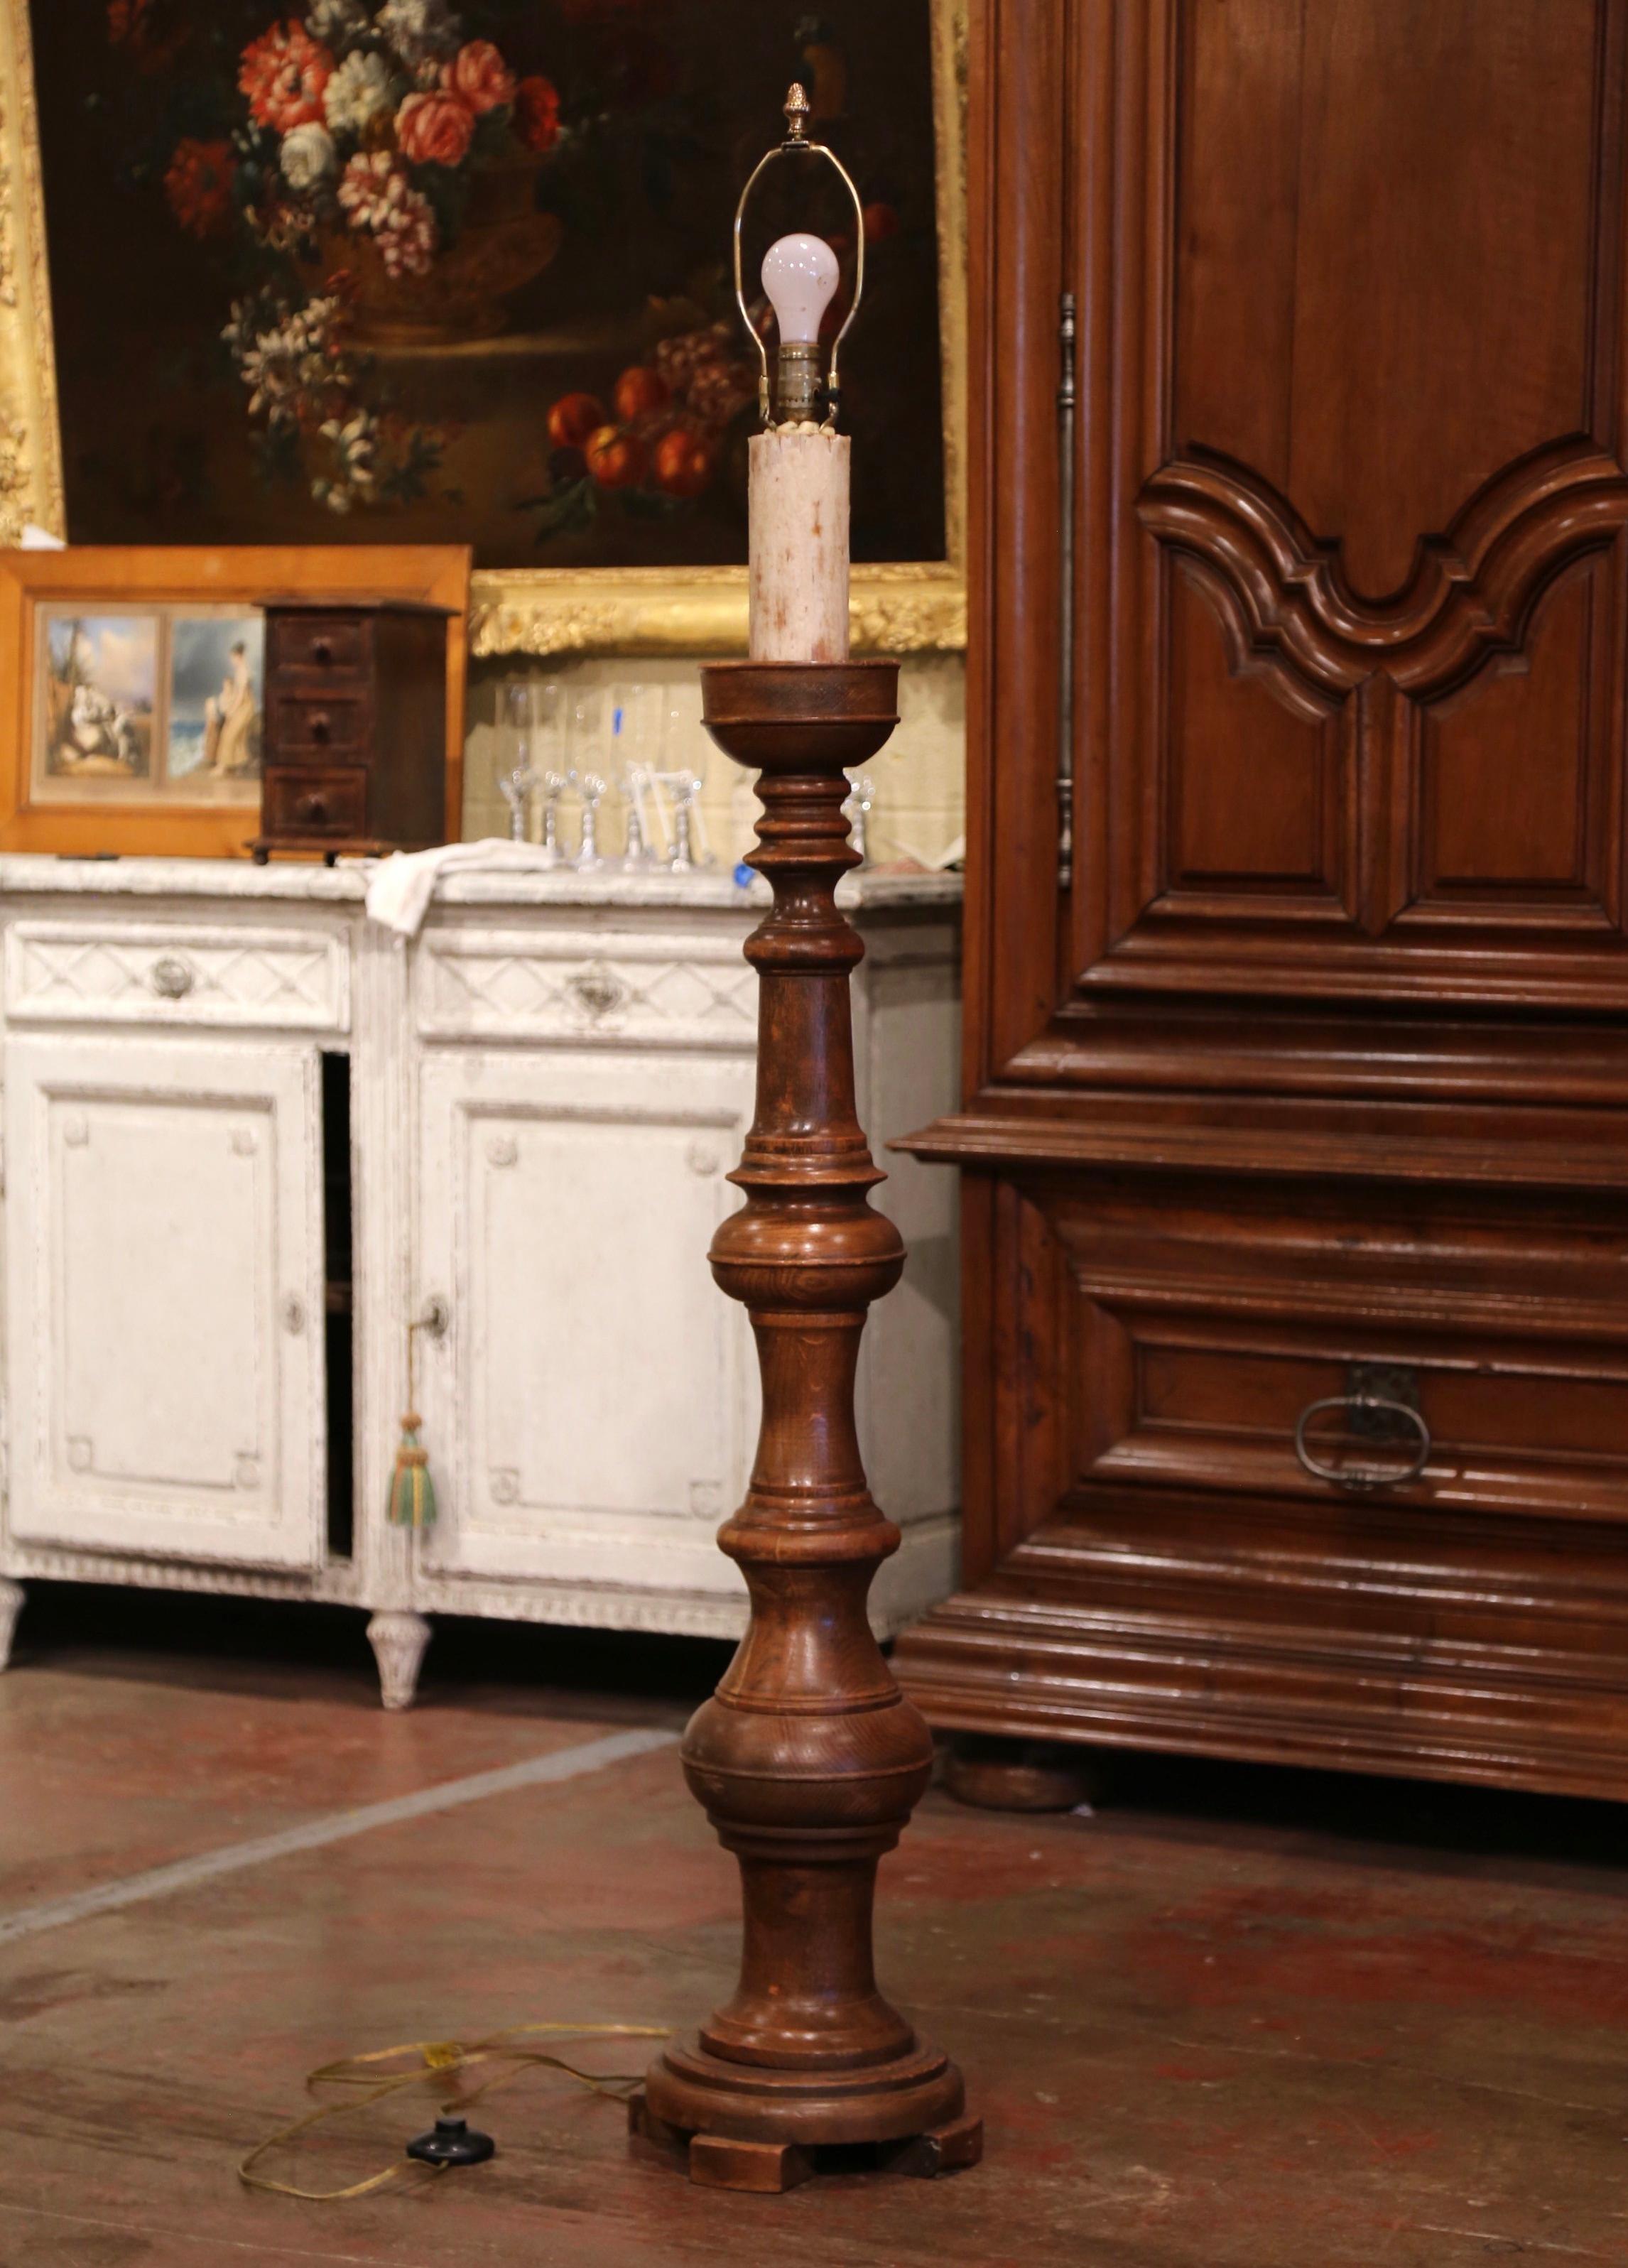 This elegant antique carved lamp was crafted in France, circa 1950. The fixture stands on a circular base with three small feet over a long turned stem. The lamp with a single center light is embellished with a large wax candle. The floor lamp is in